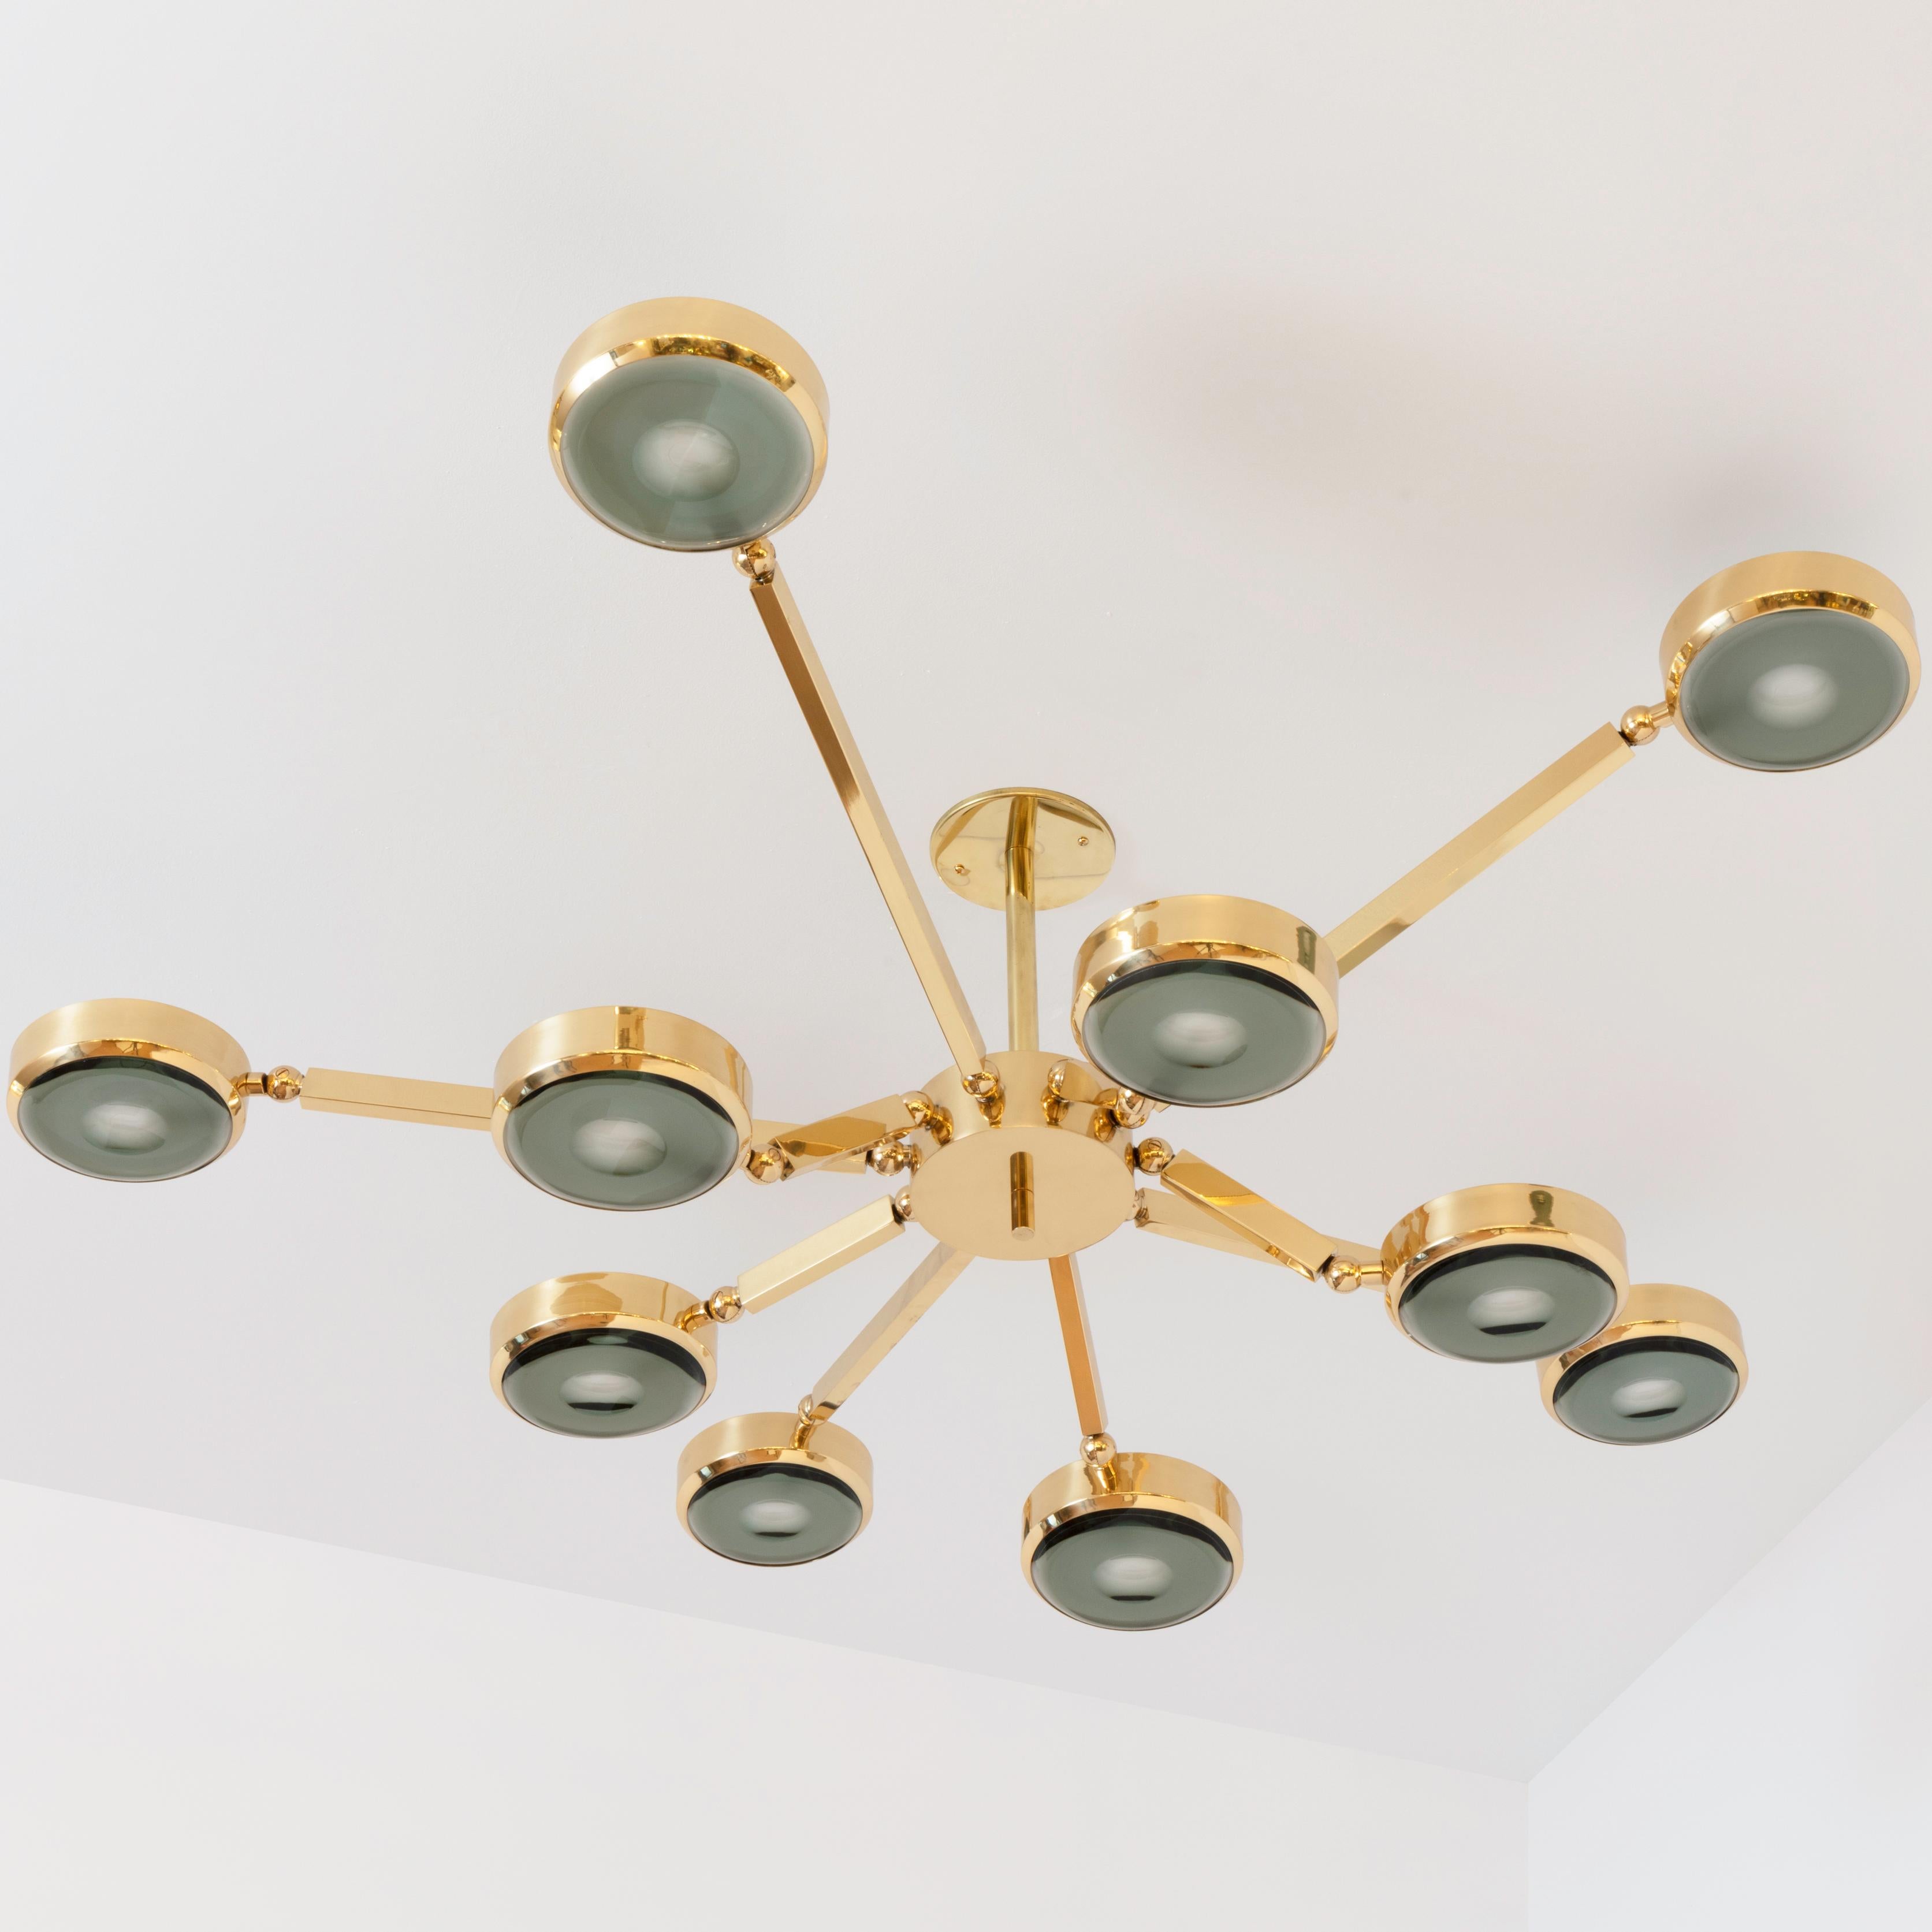 Oculus Articulating Ceiling Light-Polished Nickel Finish and Carved Glass In New Condition For Sale In New York, NY